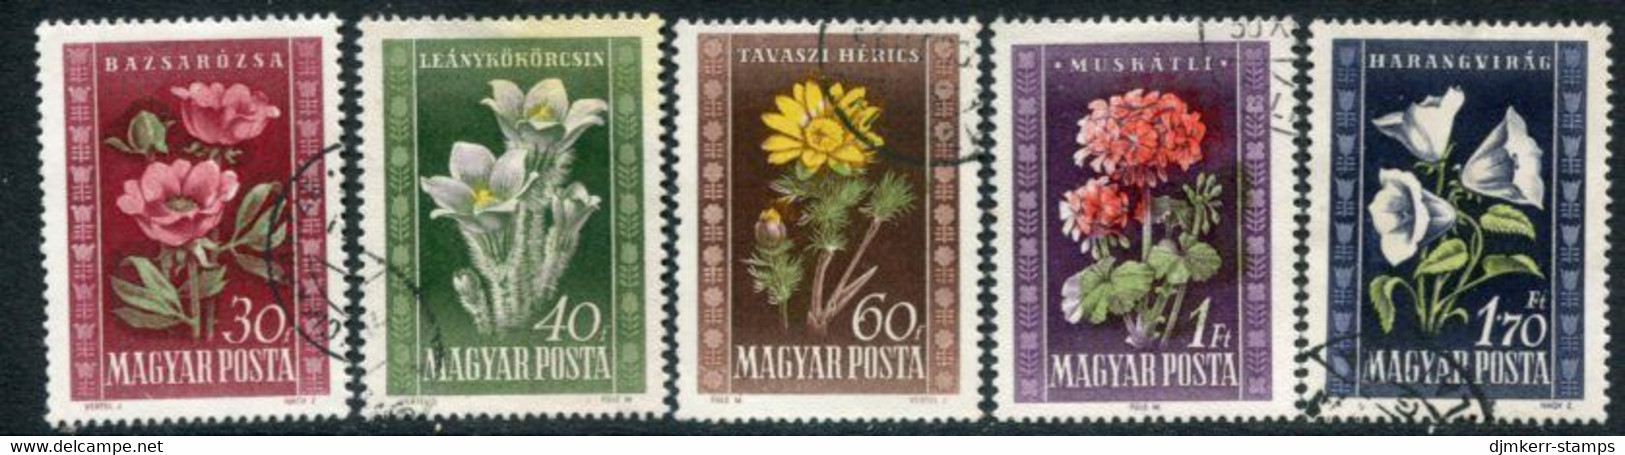 HUNGARY 1950 Flowers Used.  Michel 1112-16 - Used Stamps